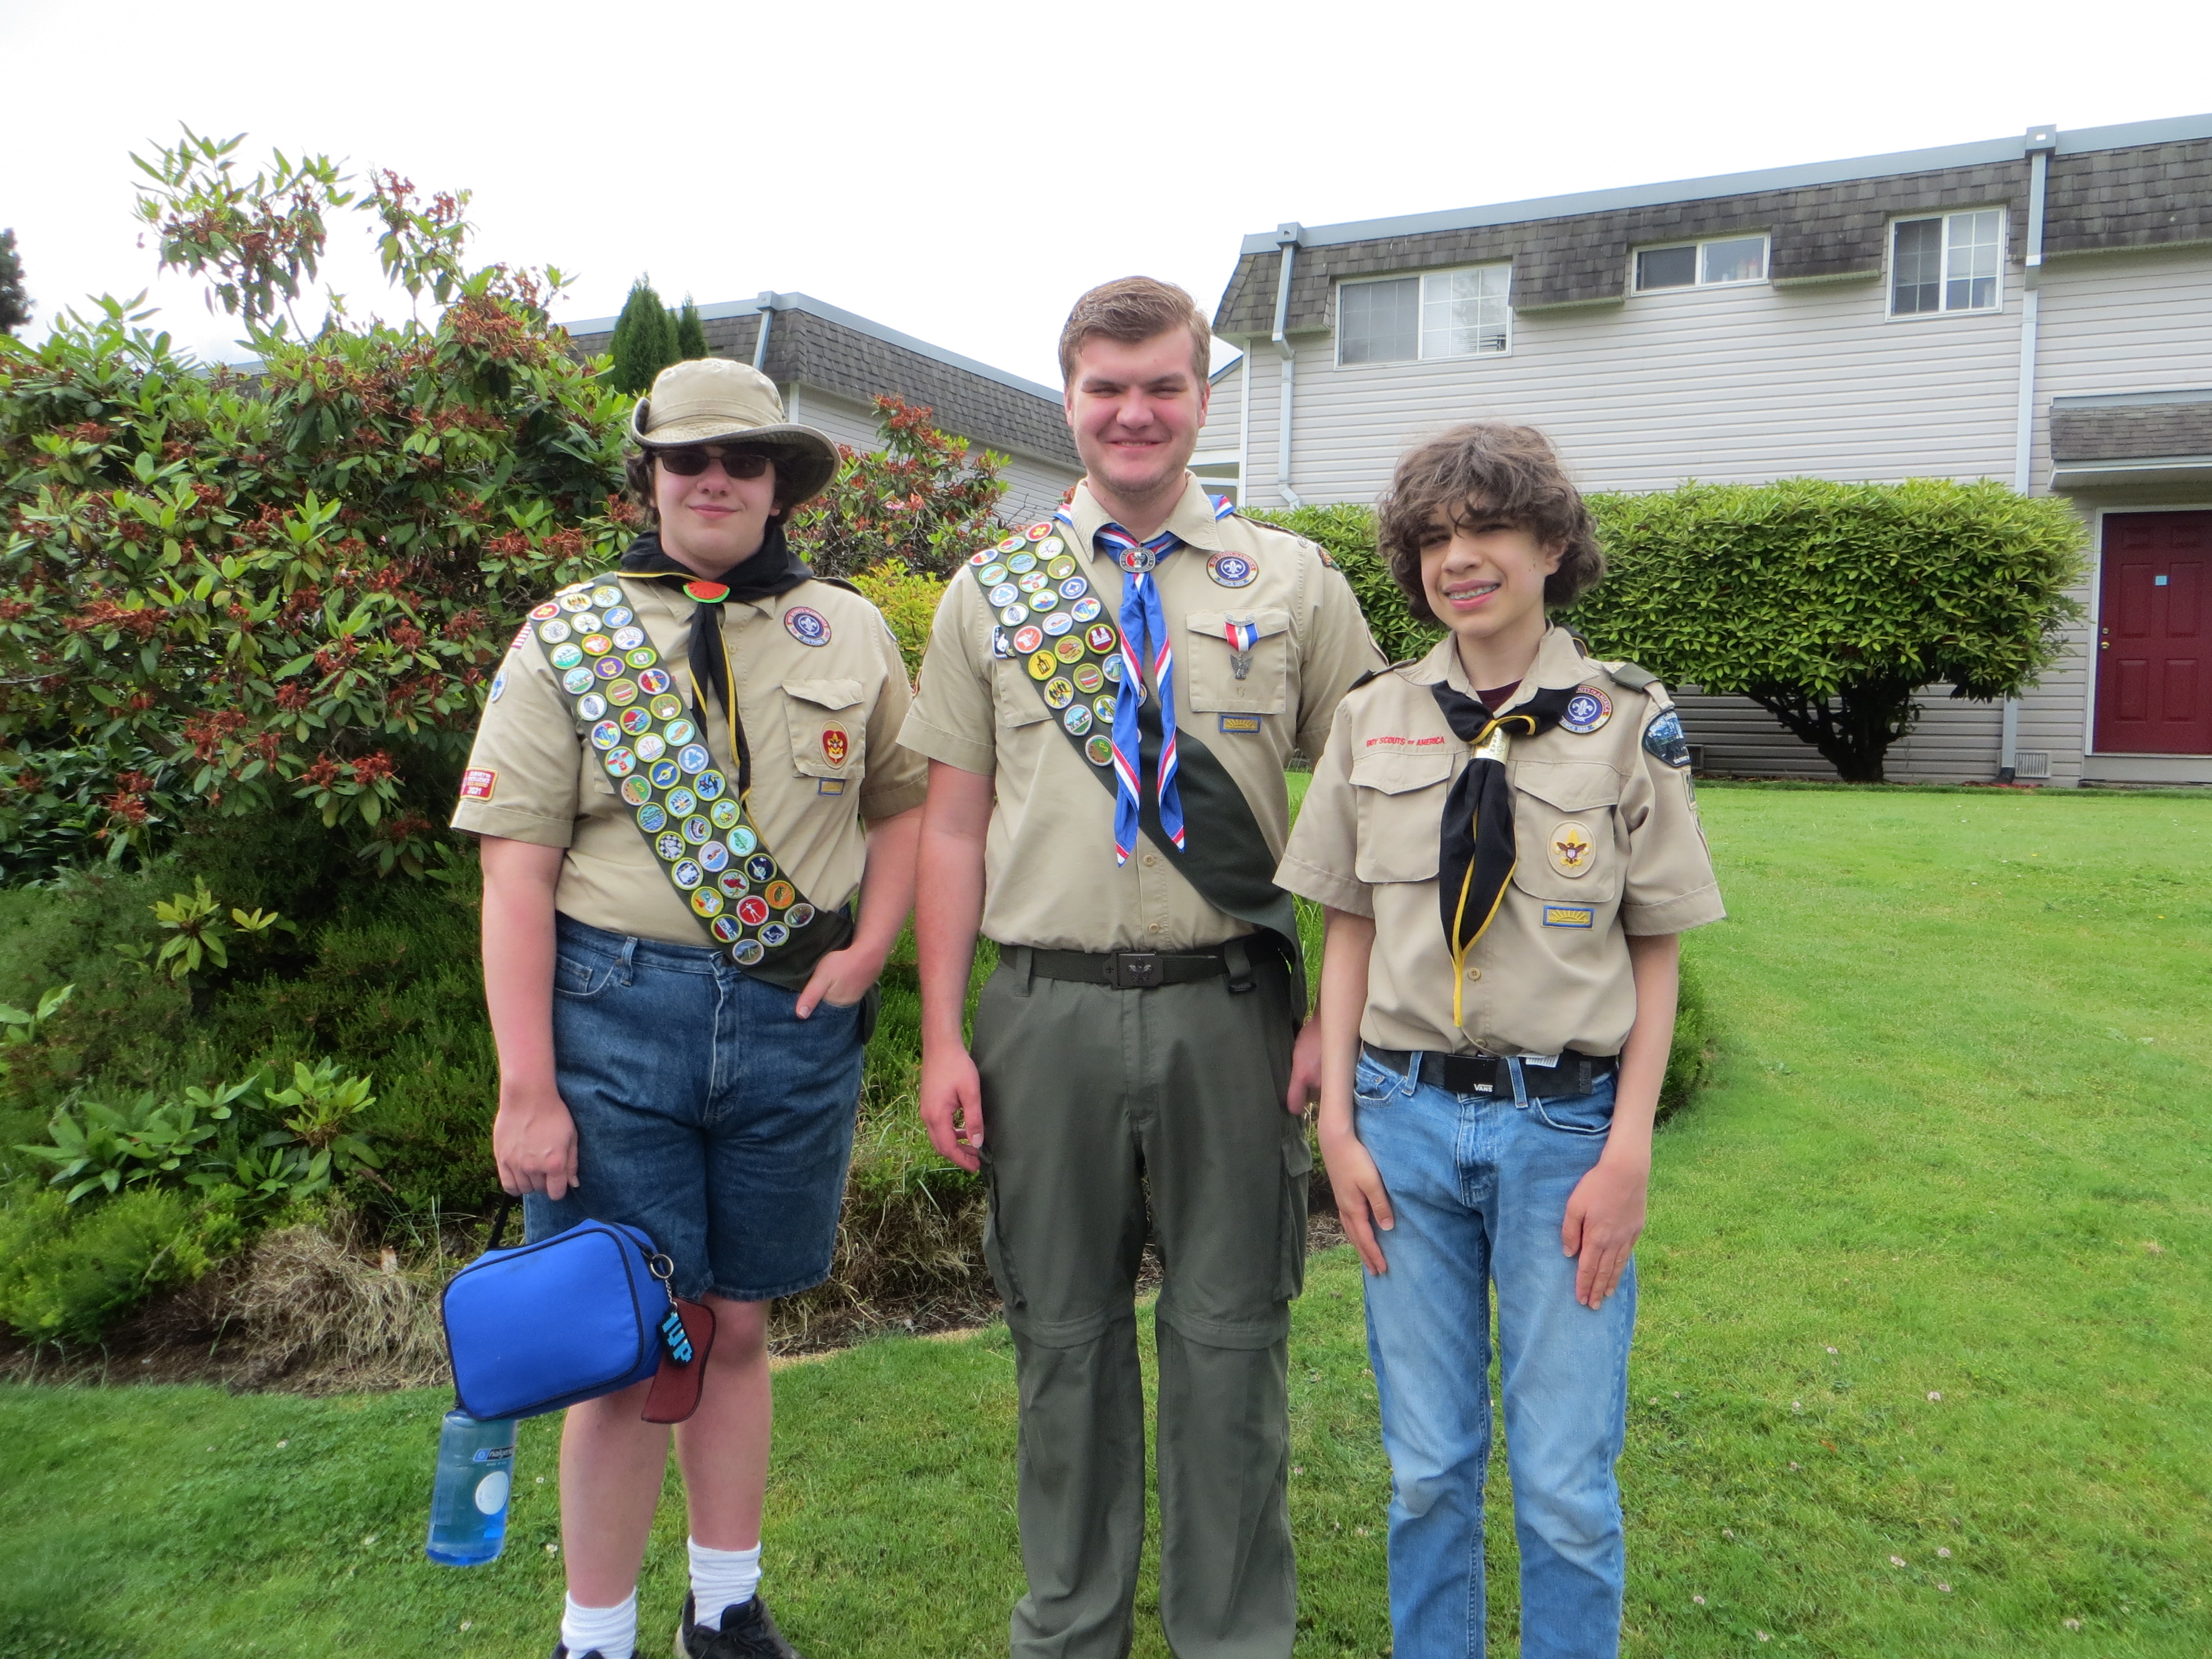 Three scouts standing in a grassy area.